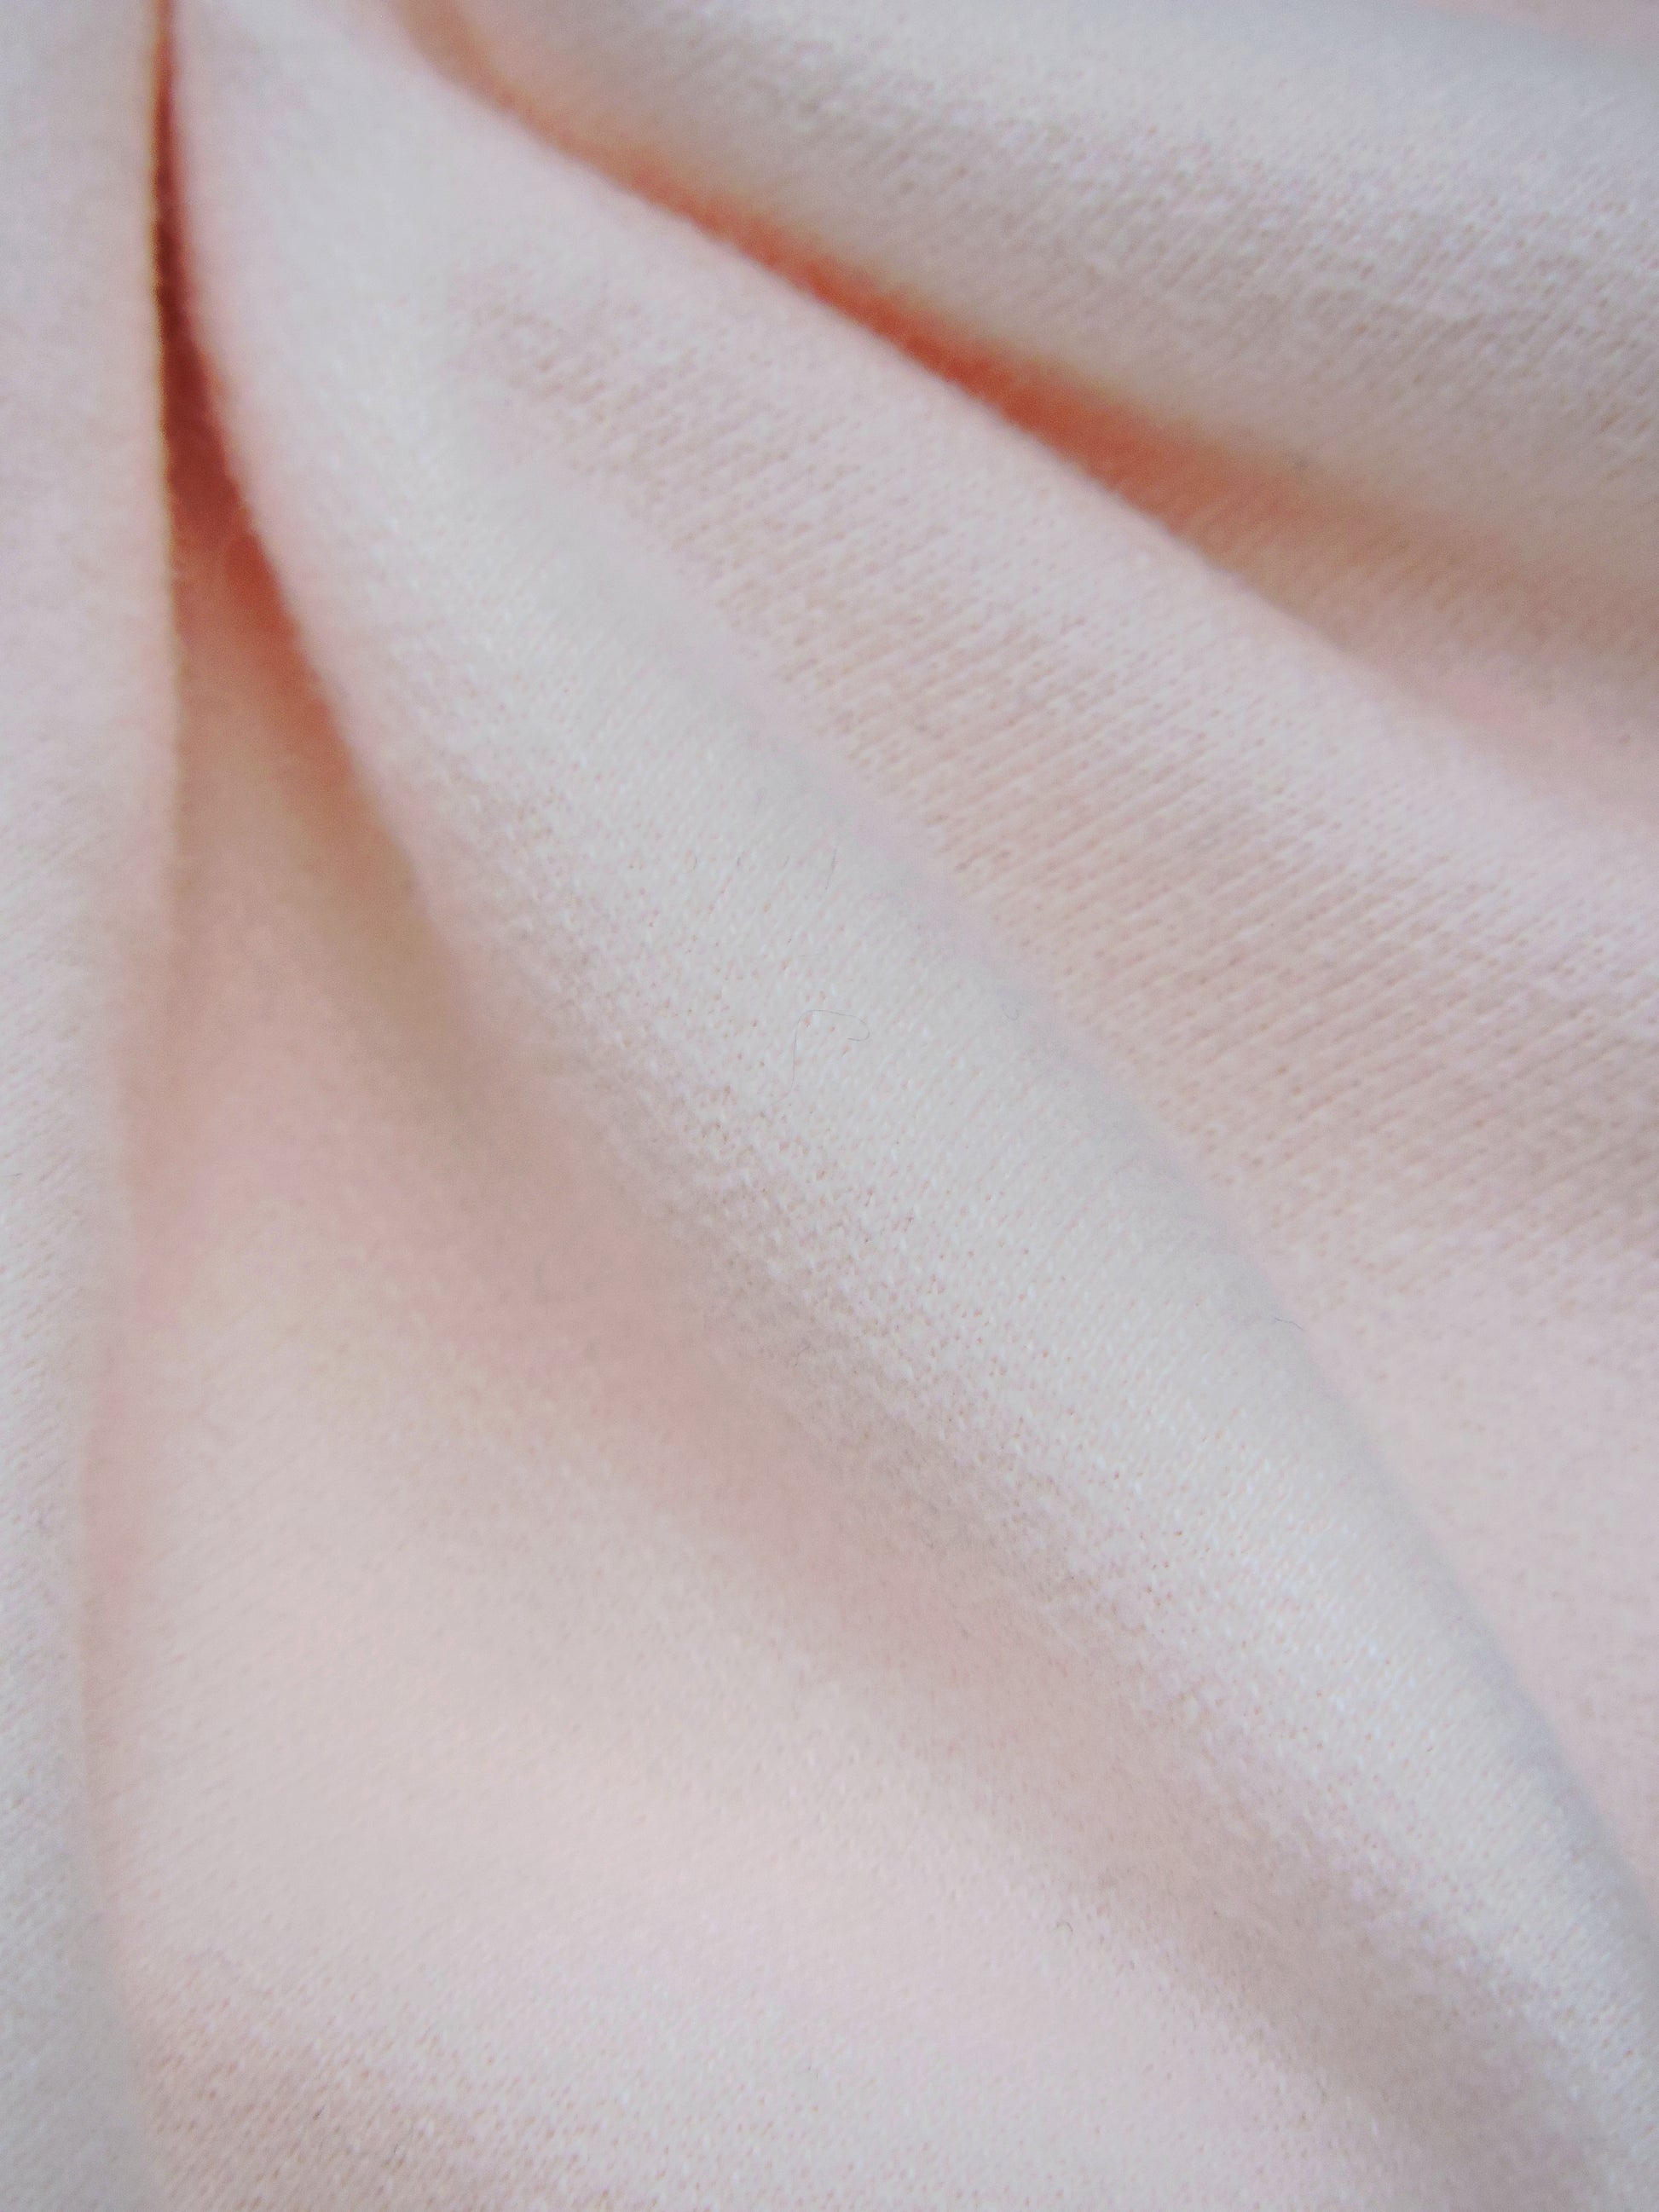 Close up of cotton material